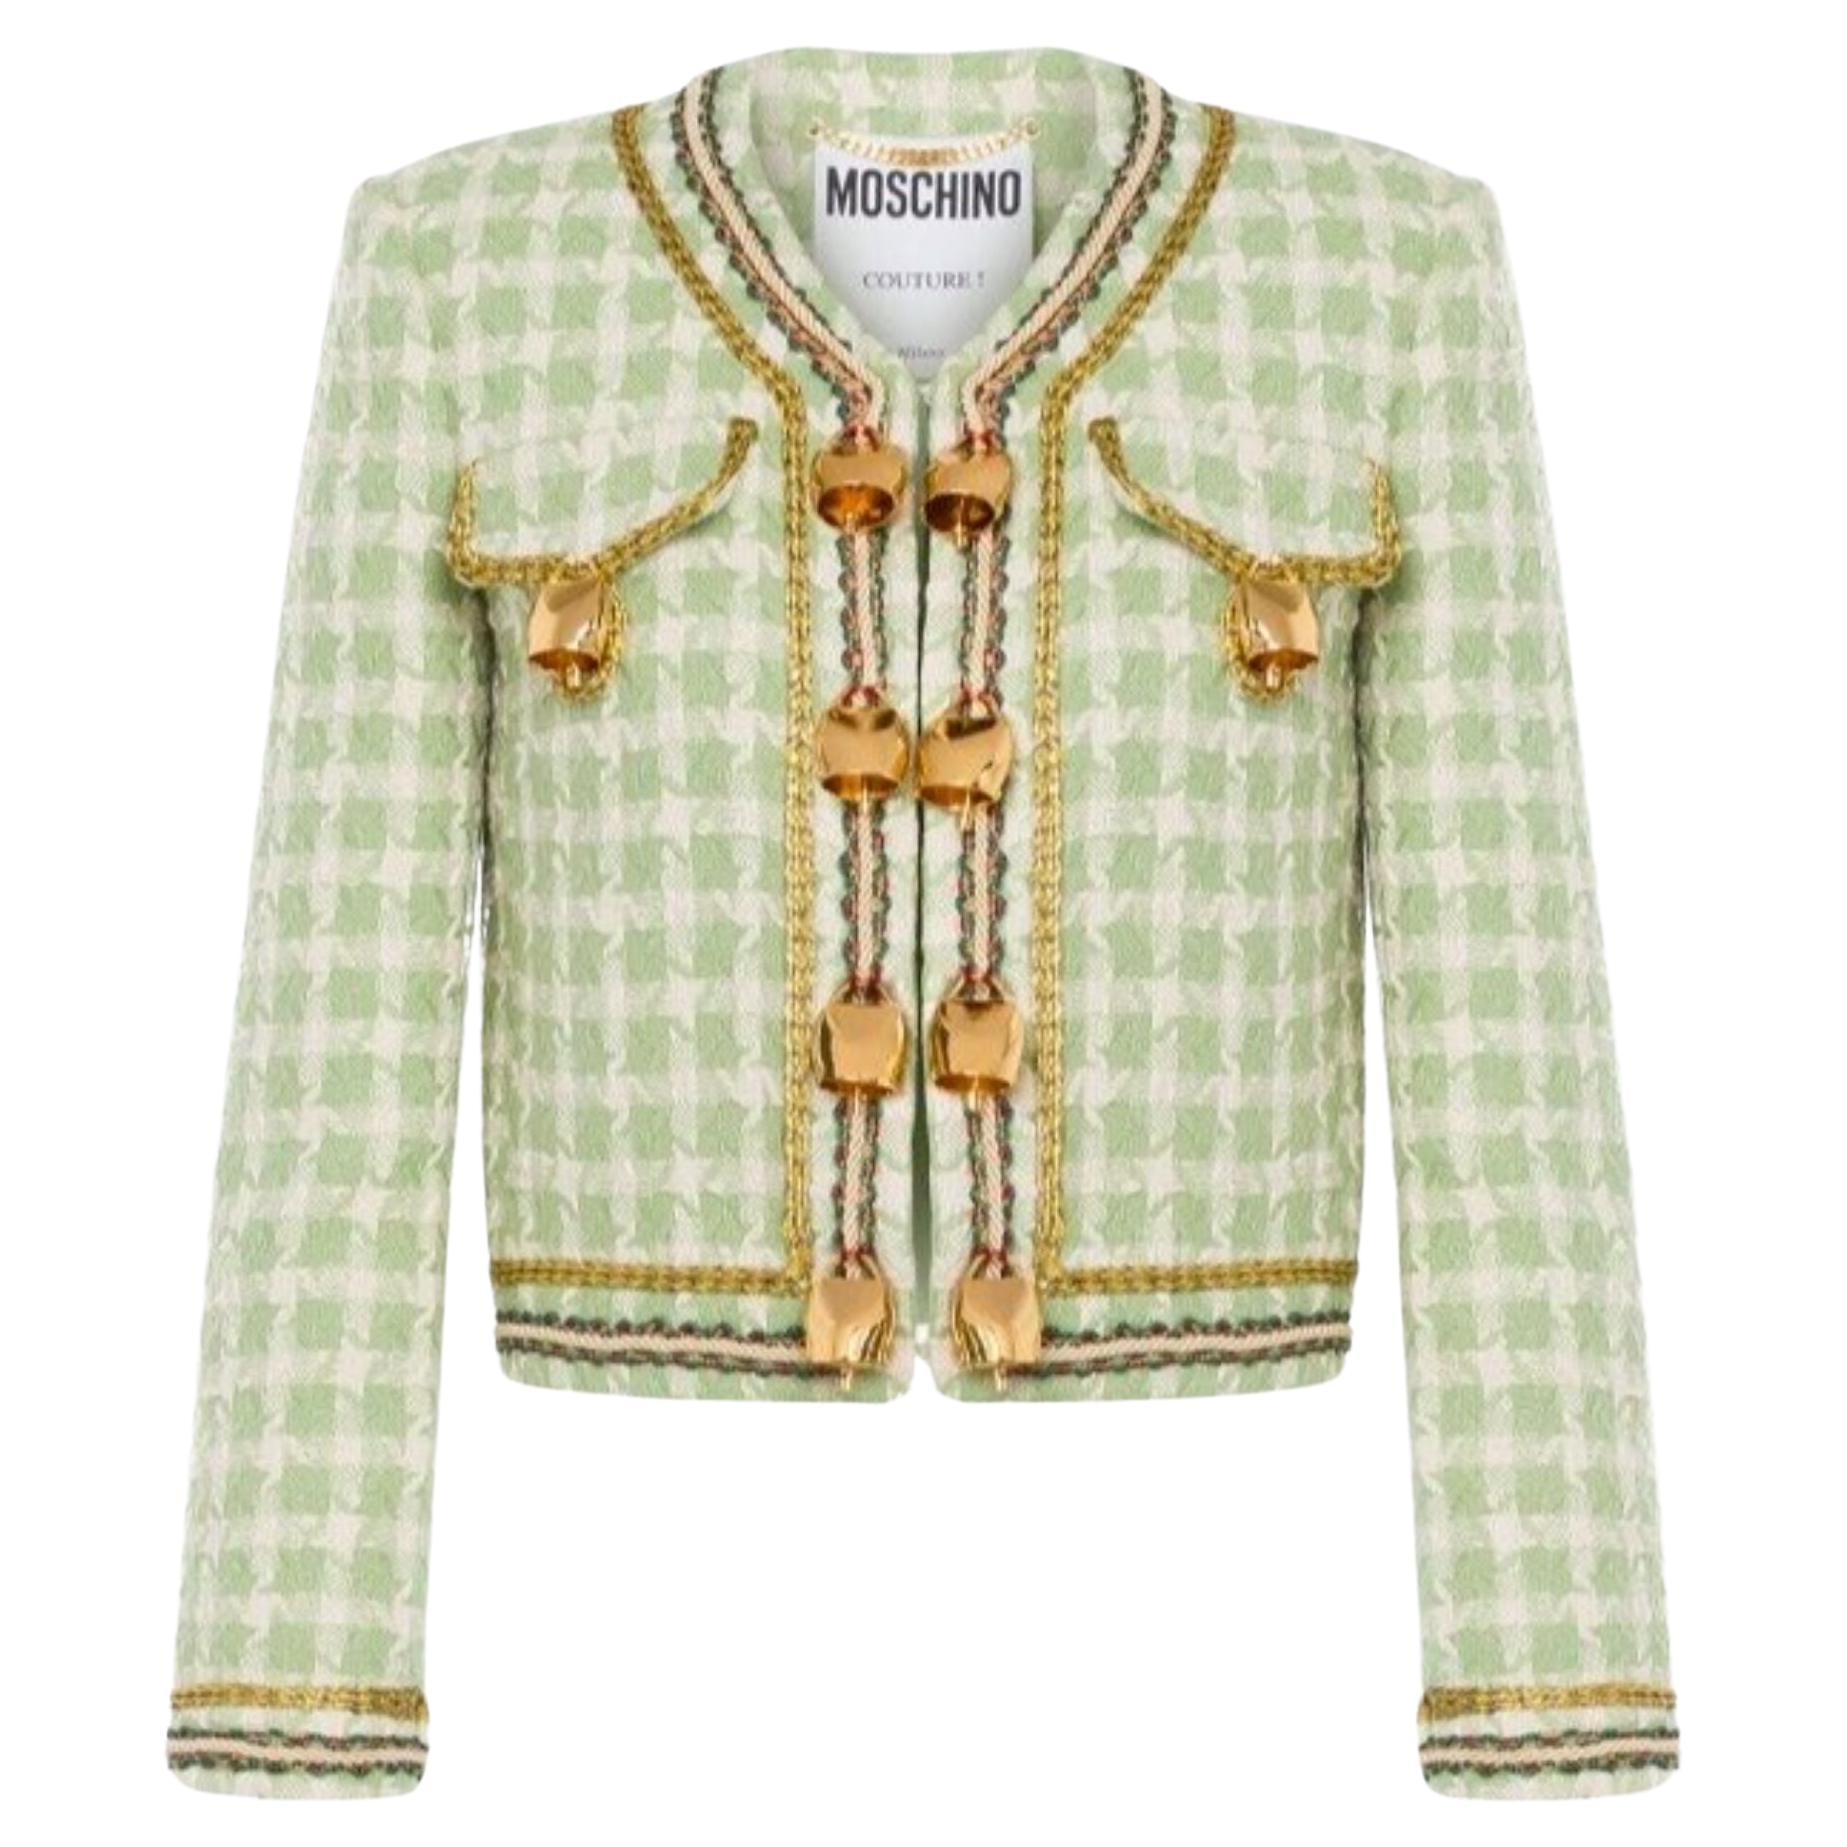 AW21 Moschino Couture Wool Cotton Jacket with Cow Bells by Jeremy Scott For Sale